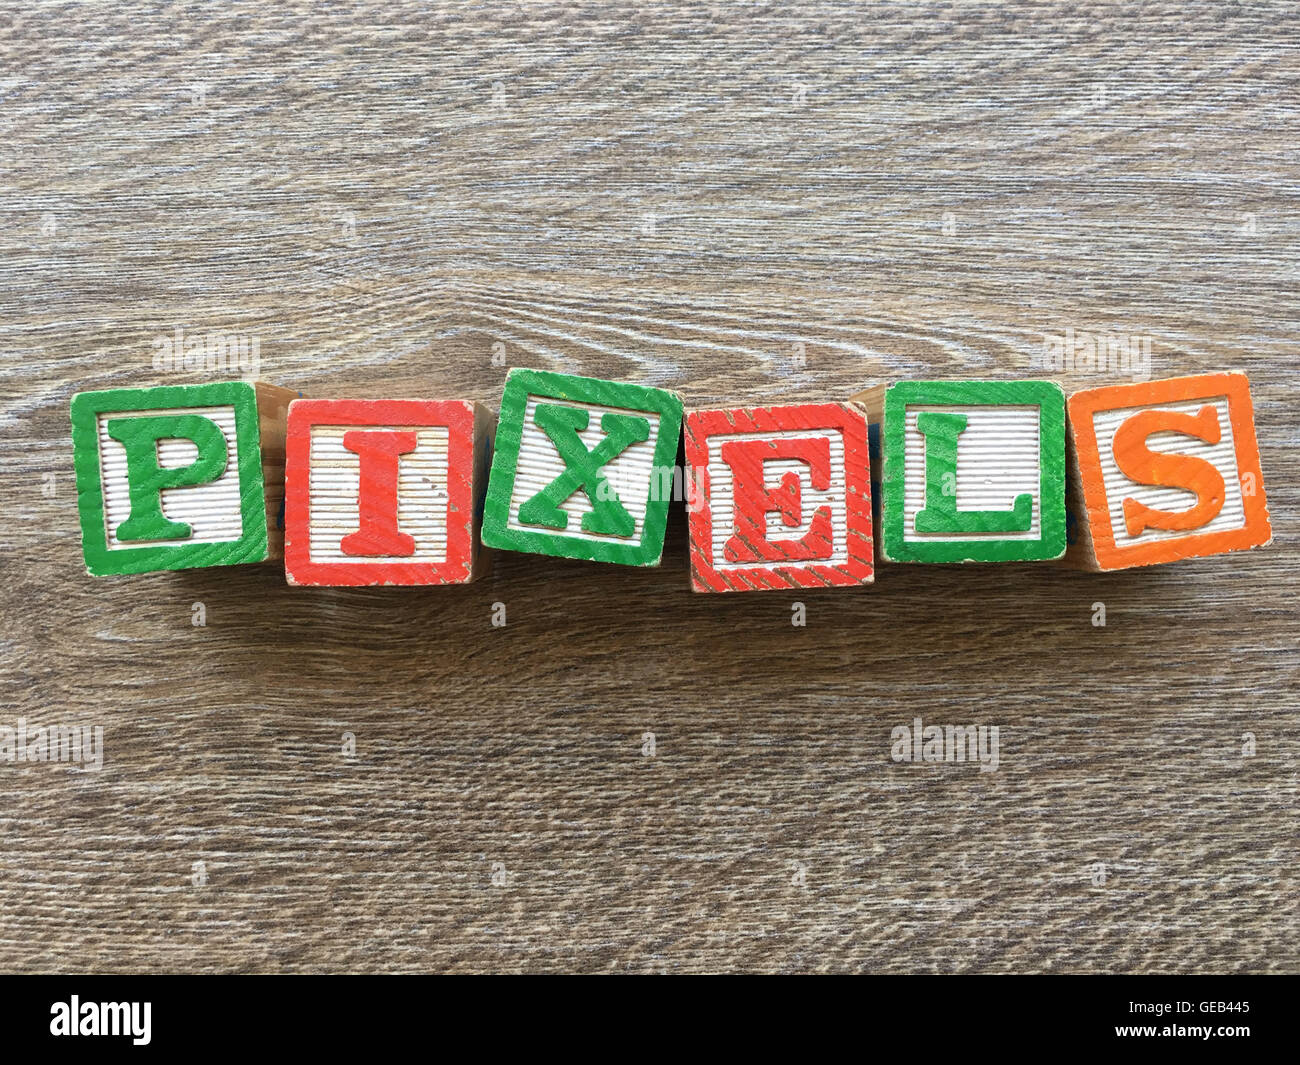 Wood blocks or wooden cubes toys with alphabet letters on them combined together to create the word PIXELS Stock Photo